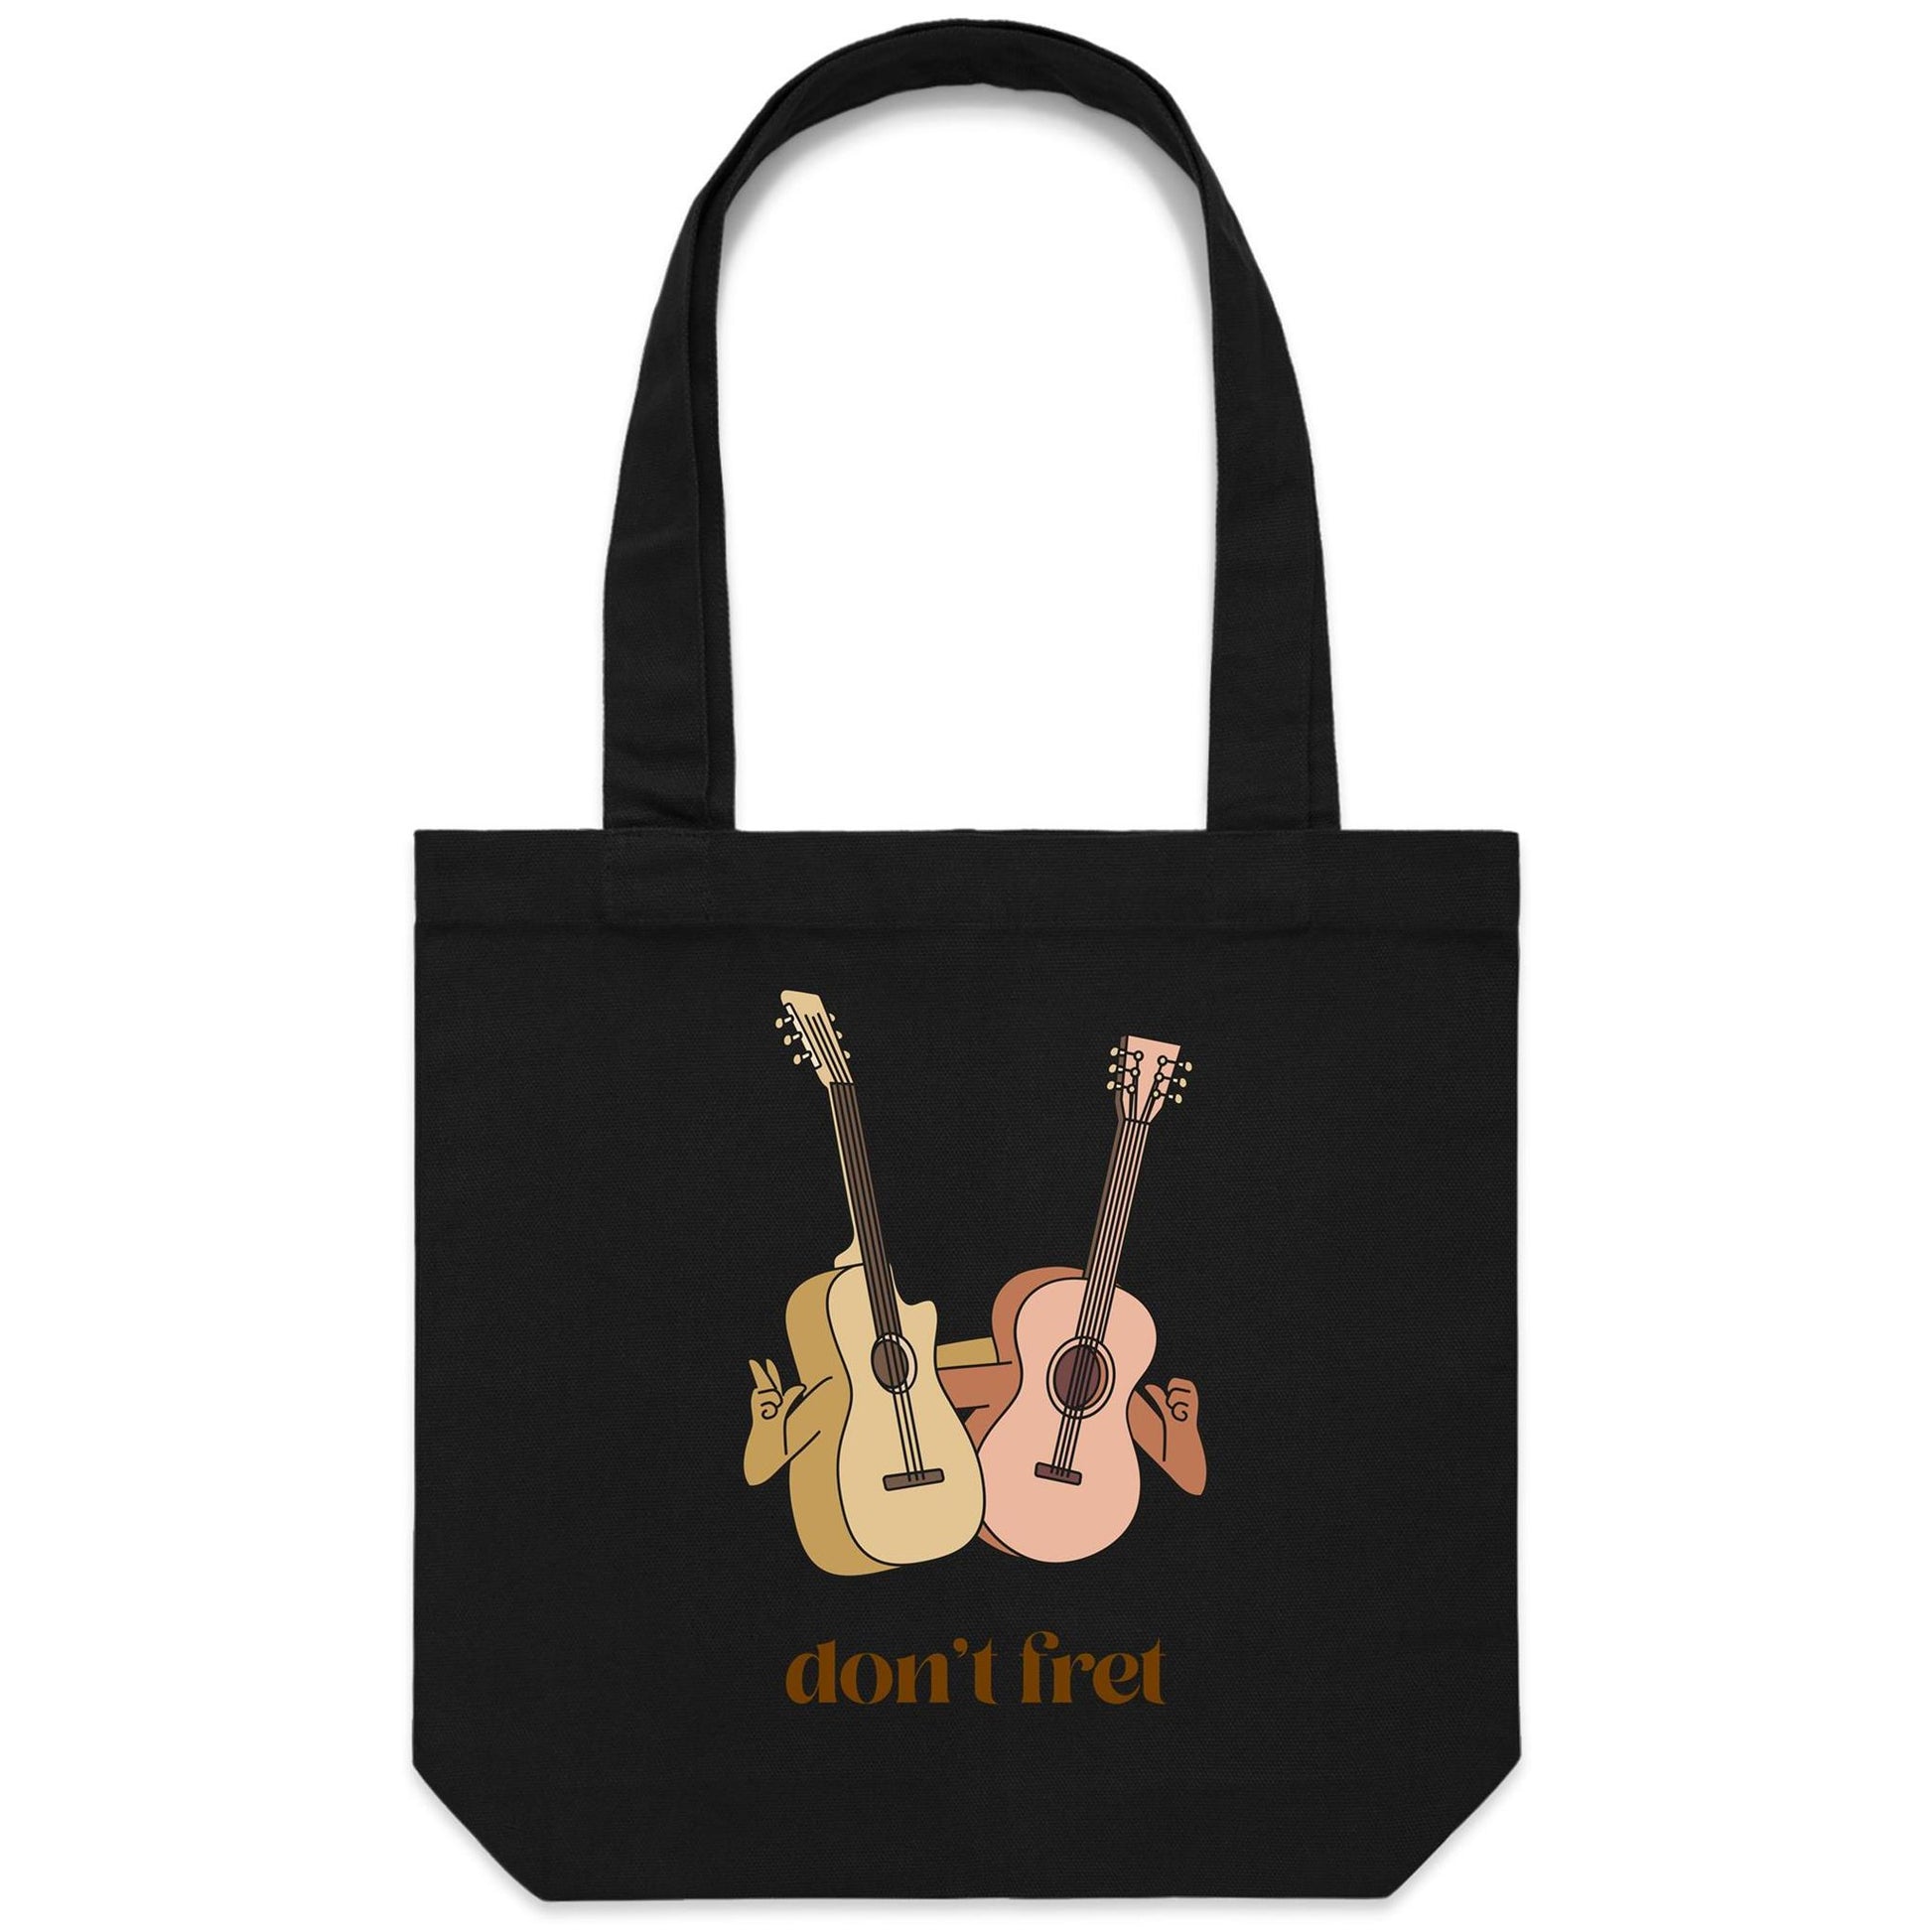 Don't Fret - Canvas Tote Bag Black One Size Tote Bag Music